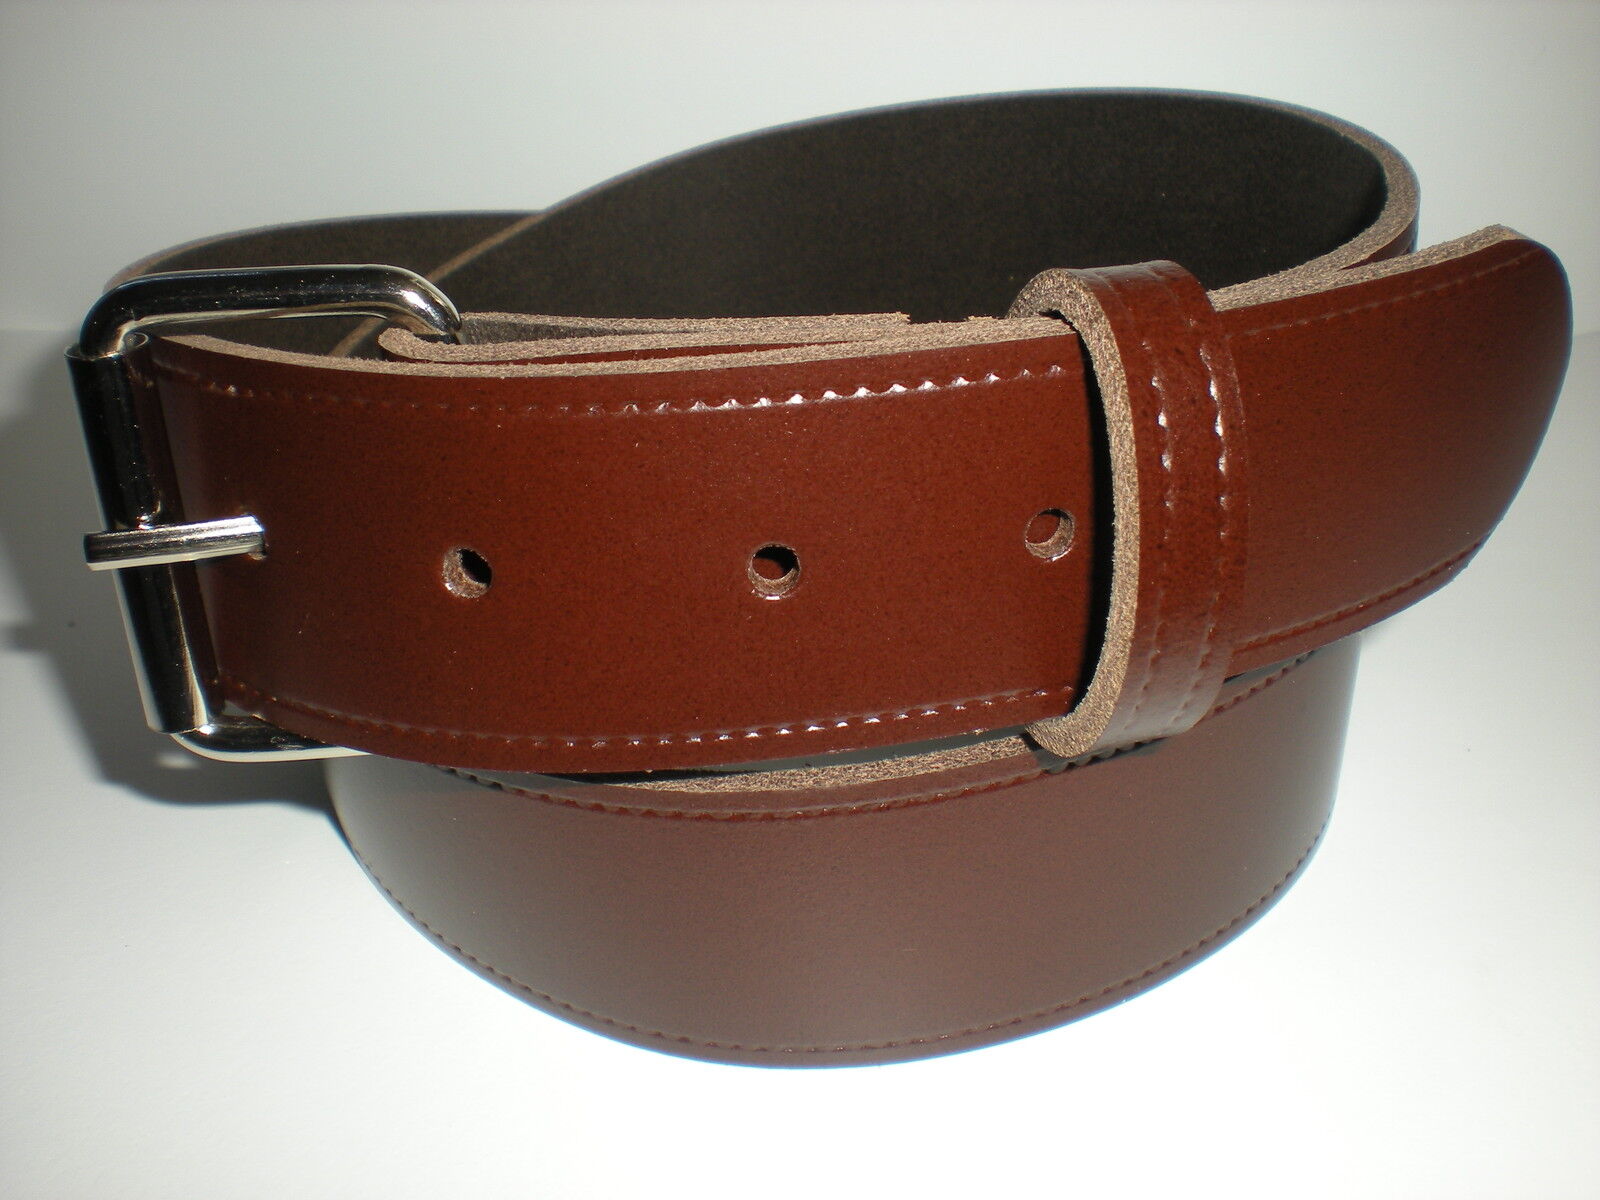 BROWN LEATHER JEAN BELTS SUITABLE FOR MEN AND WOMEN SMALL TO XXL SIZES